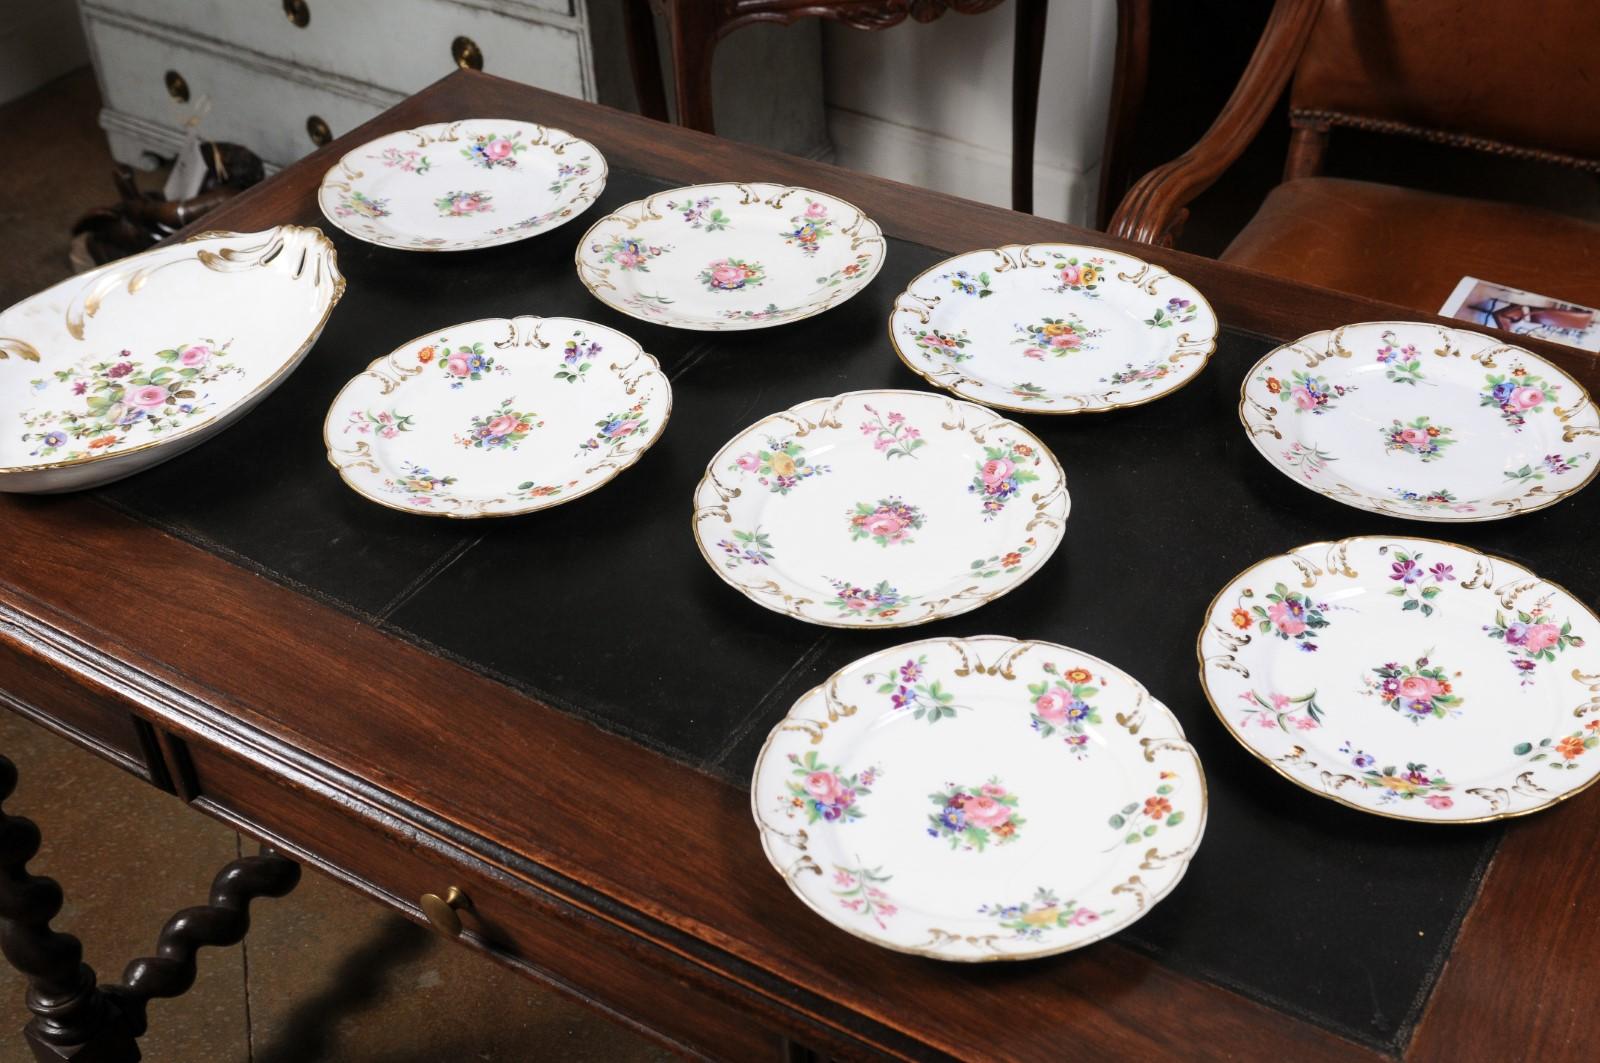 French Napoléon III period Porcelaine de Paris plates from the late 19th century, with floral décor. The plates are sold individually $145 each, the large platter is priced $225. Created in France during the third quarter of the 19th century at the